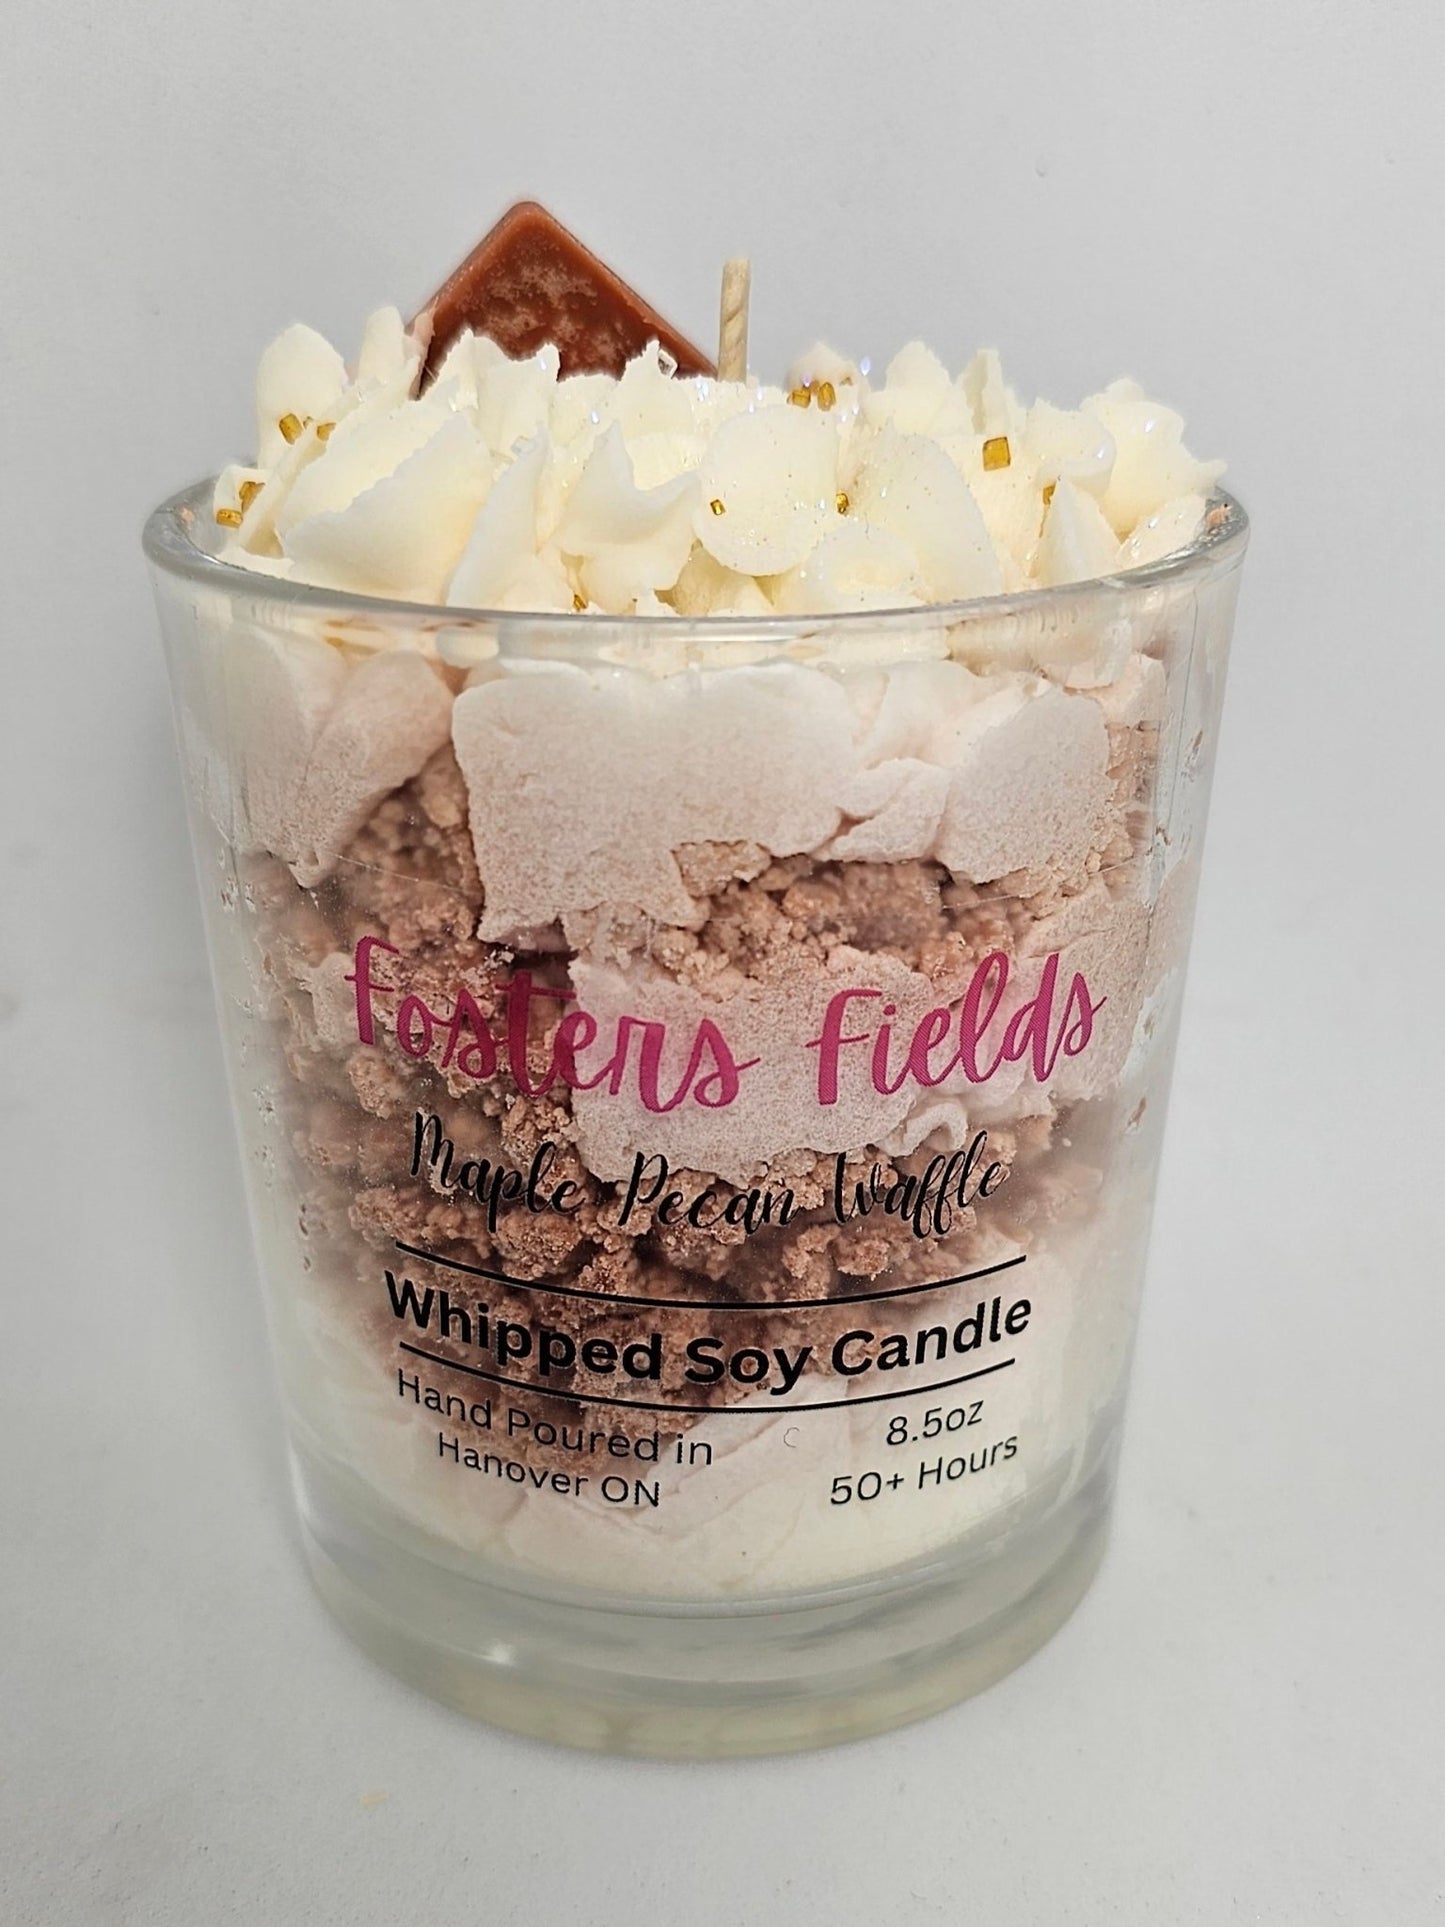 Maple Pecan Waffle Soy Candle - FostersFields